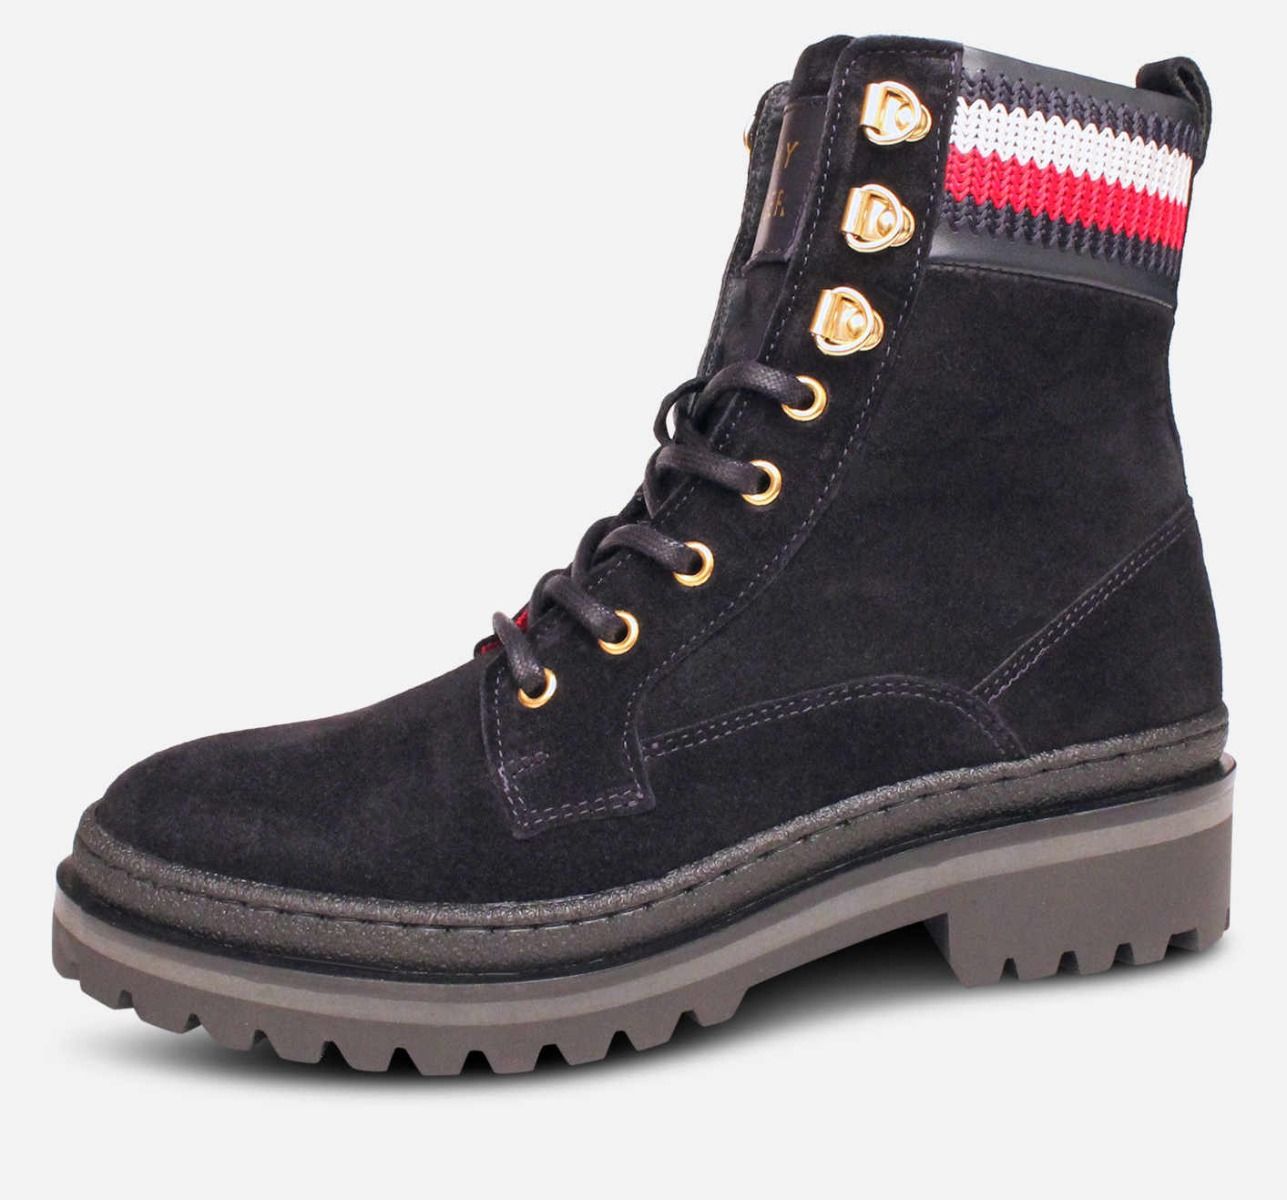 Tommy Hilfiger Dark Navy Blue Suede Lace Up Boots | Boots